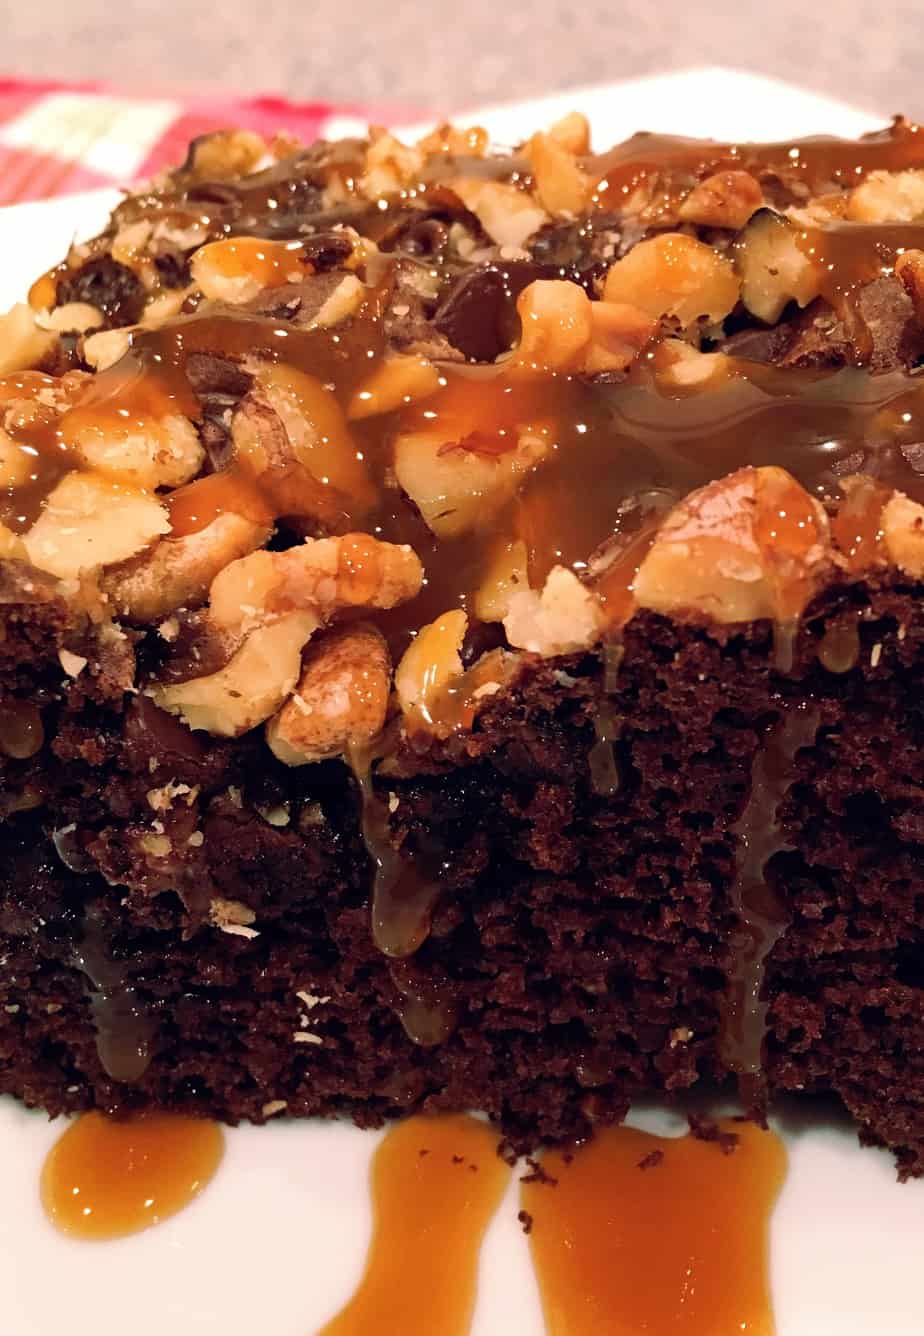 chocolate cake with walnuts and chocolate chips